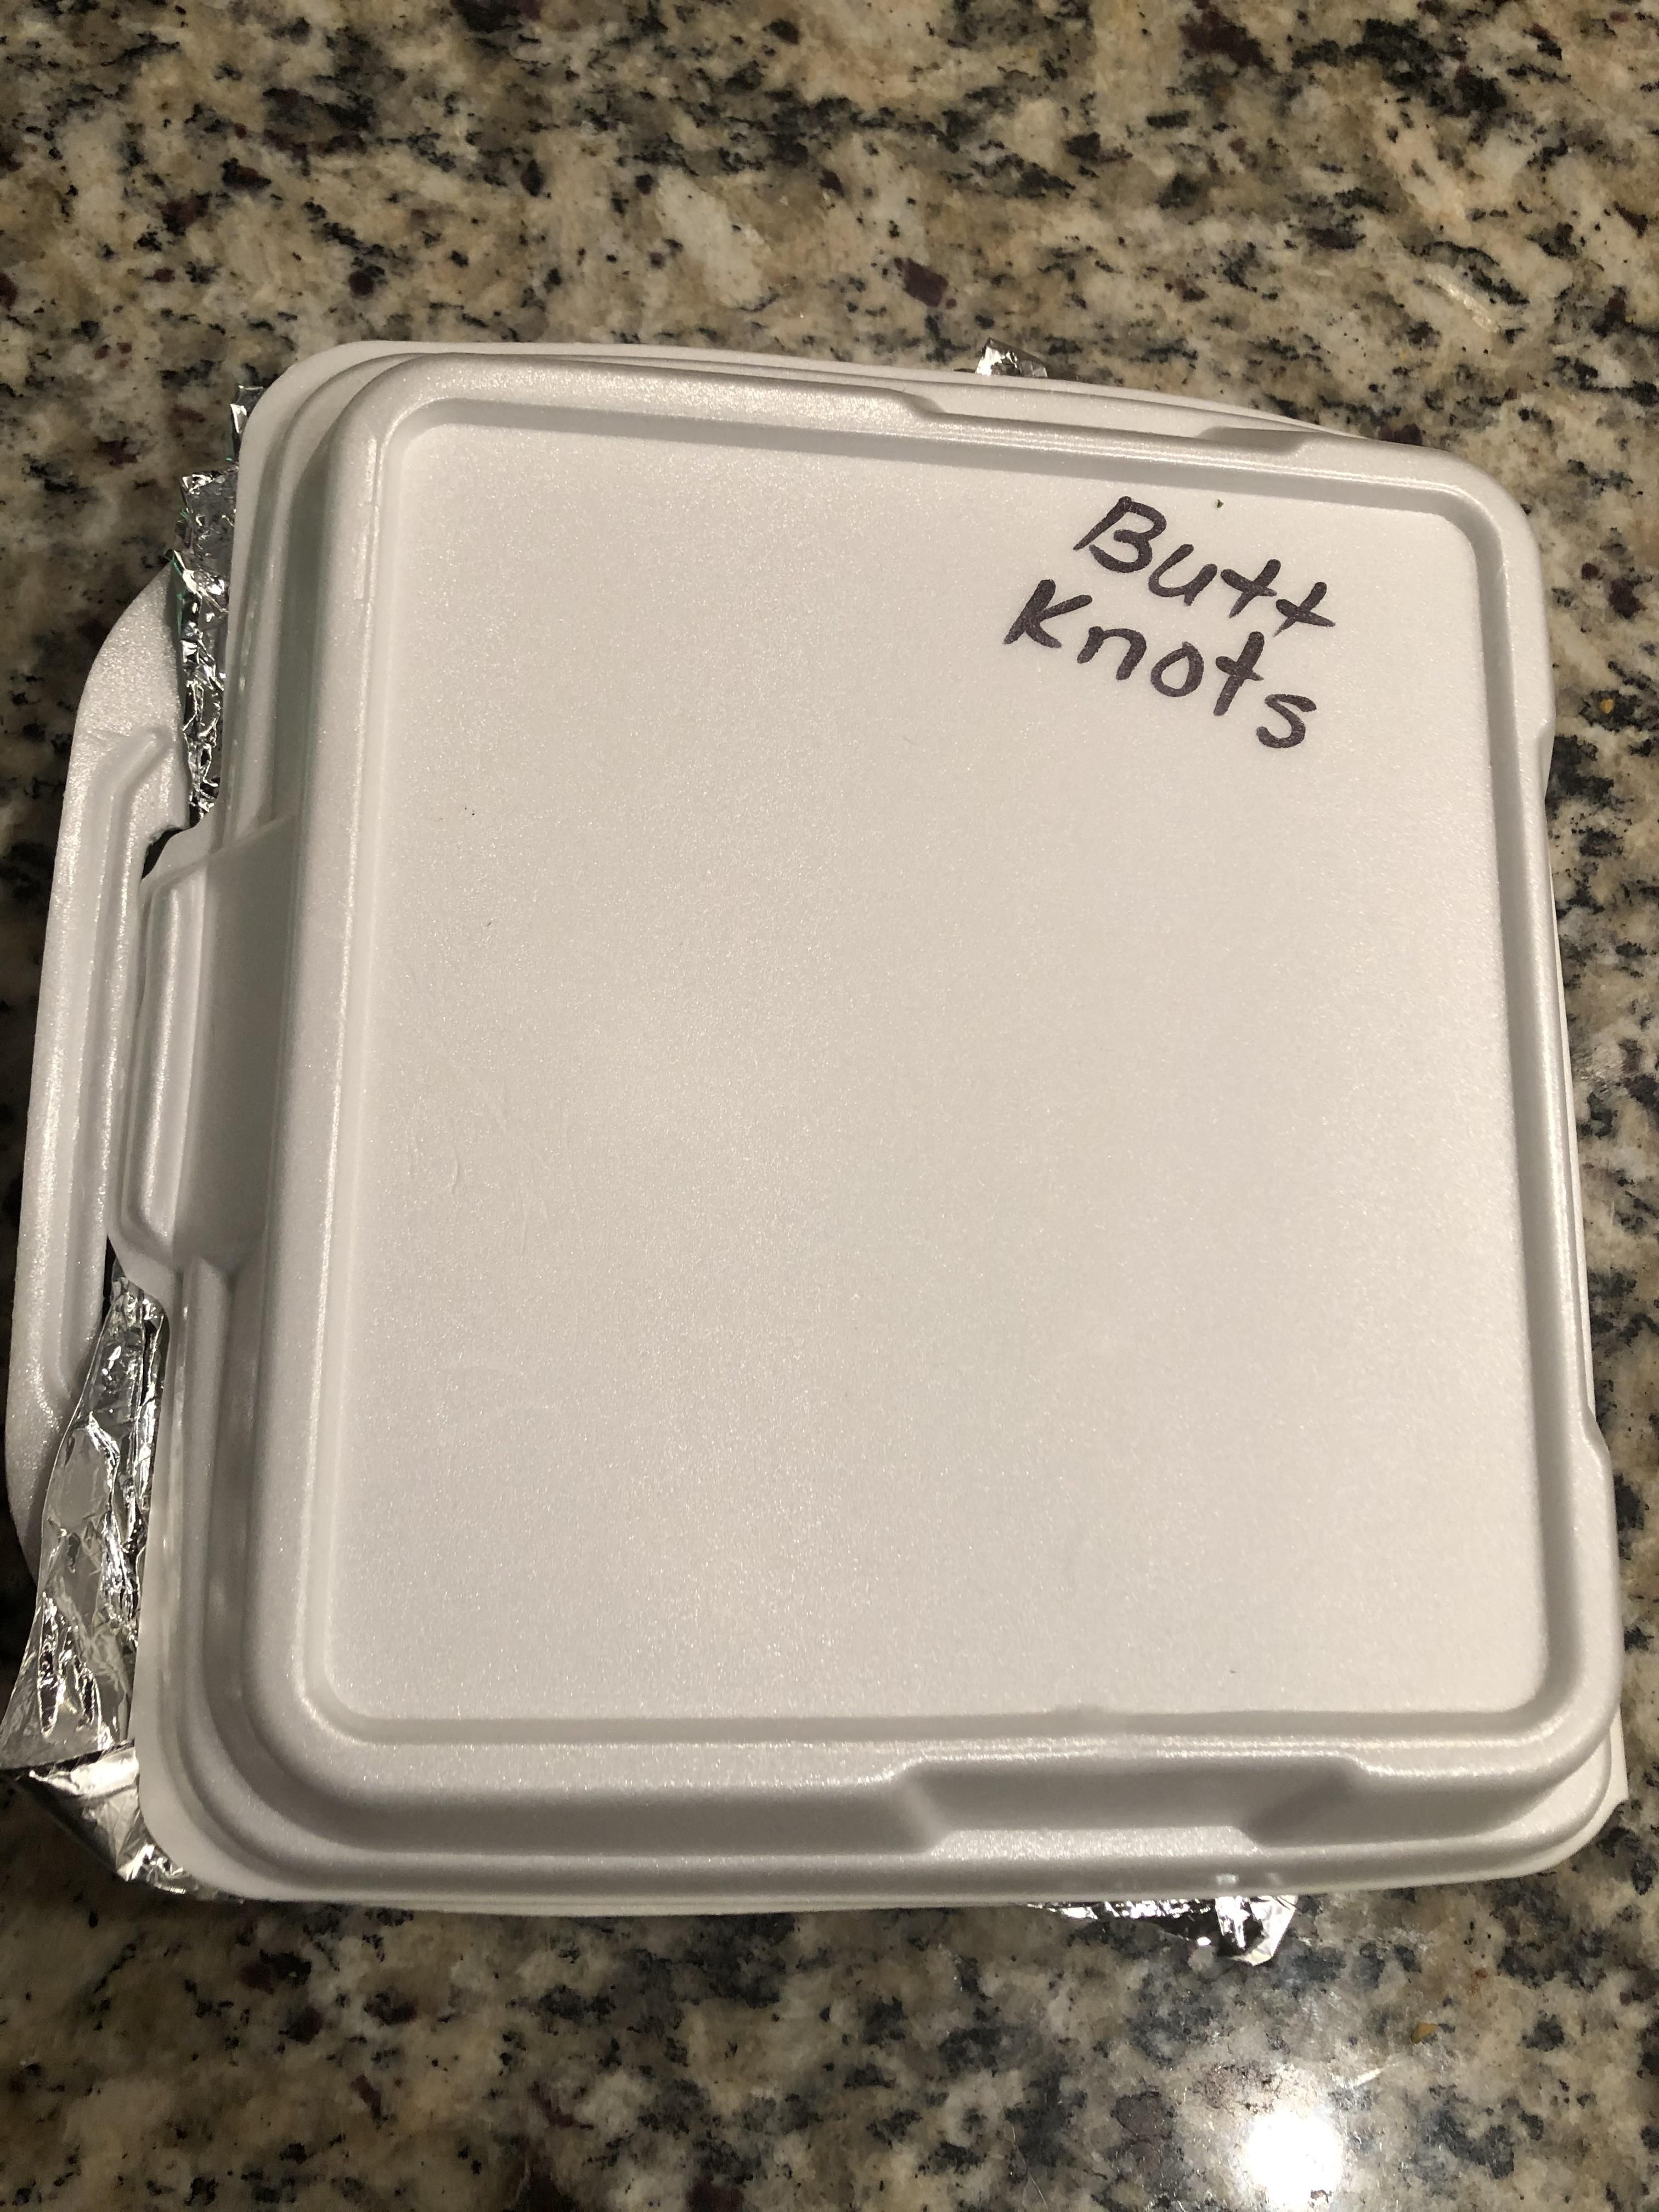 I ordered garlic butter knots. I’m afraid to open it.